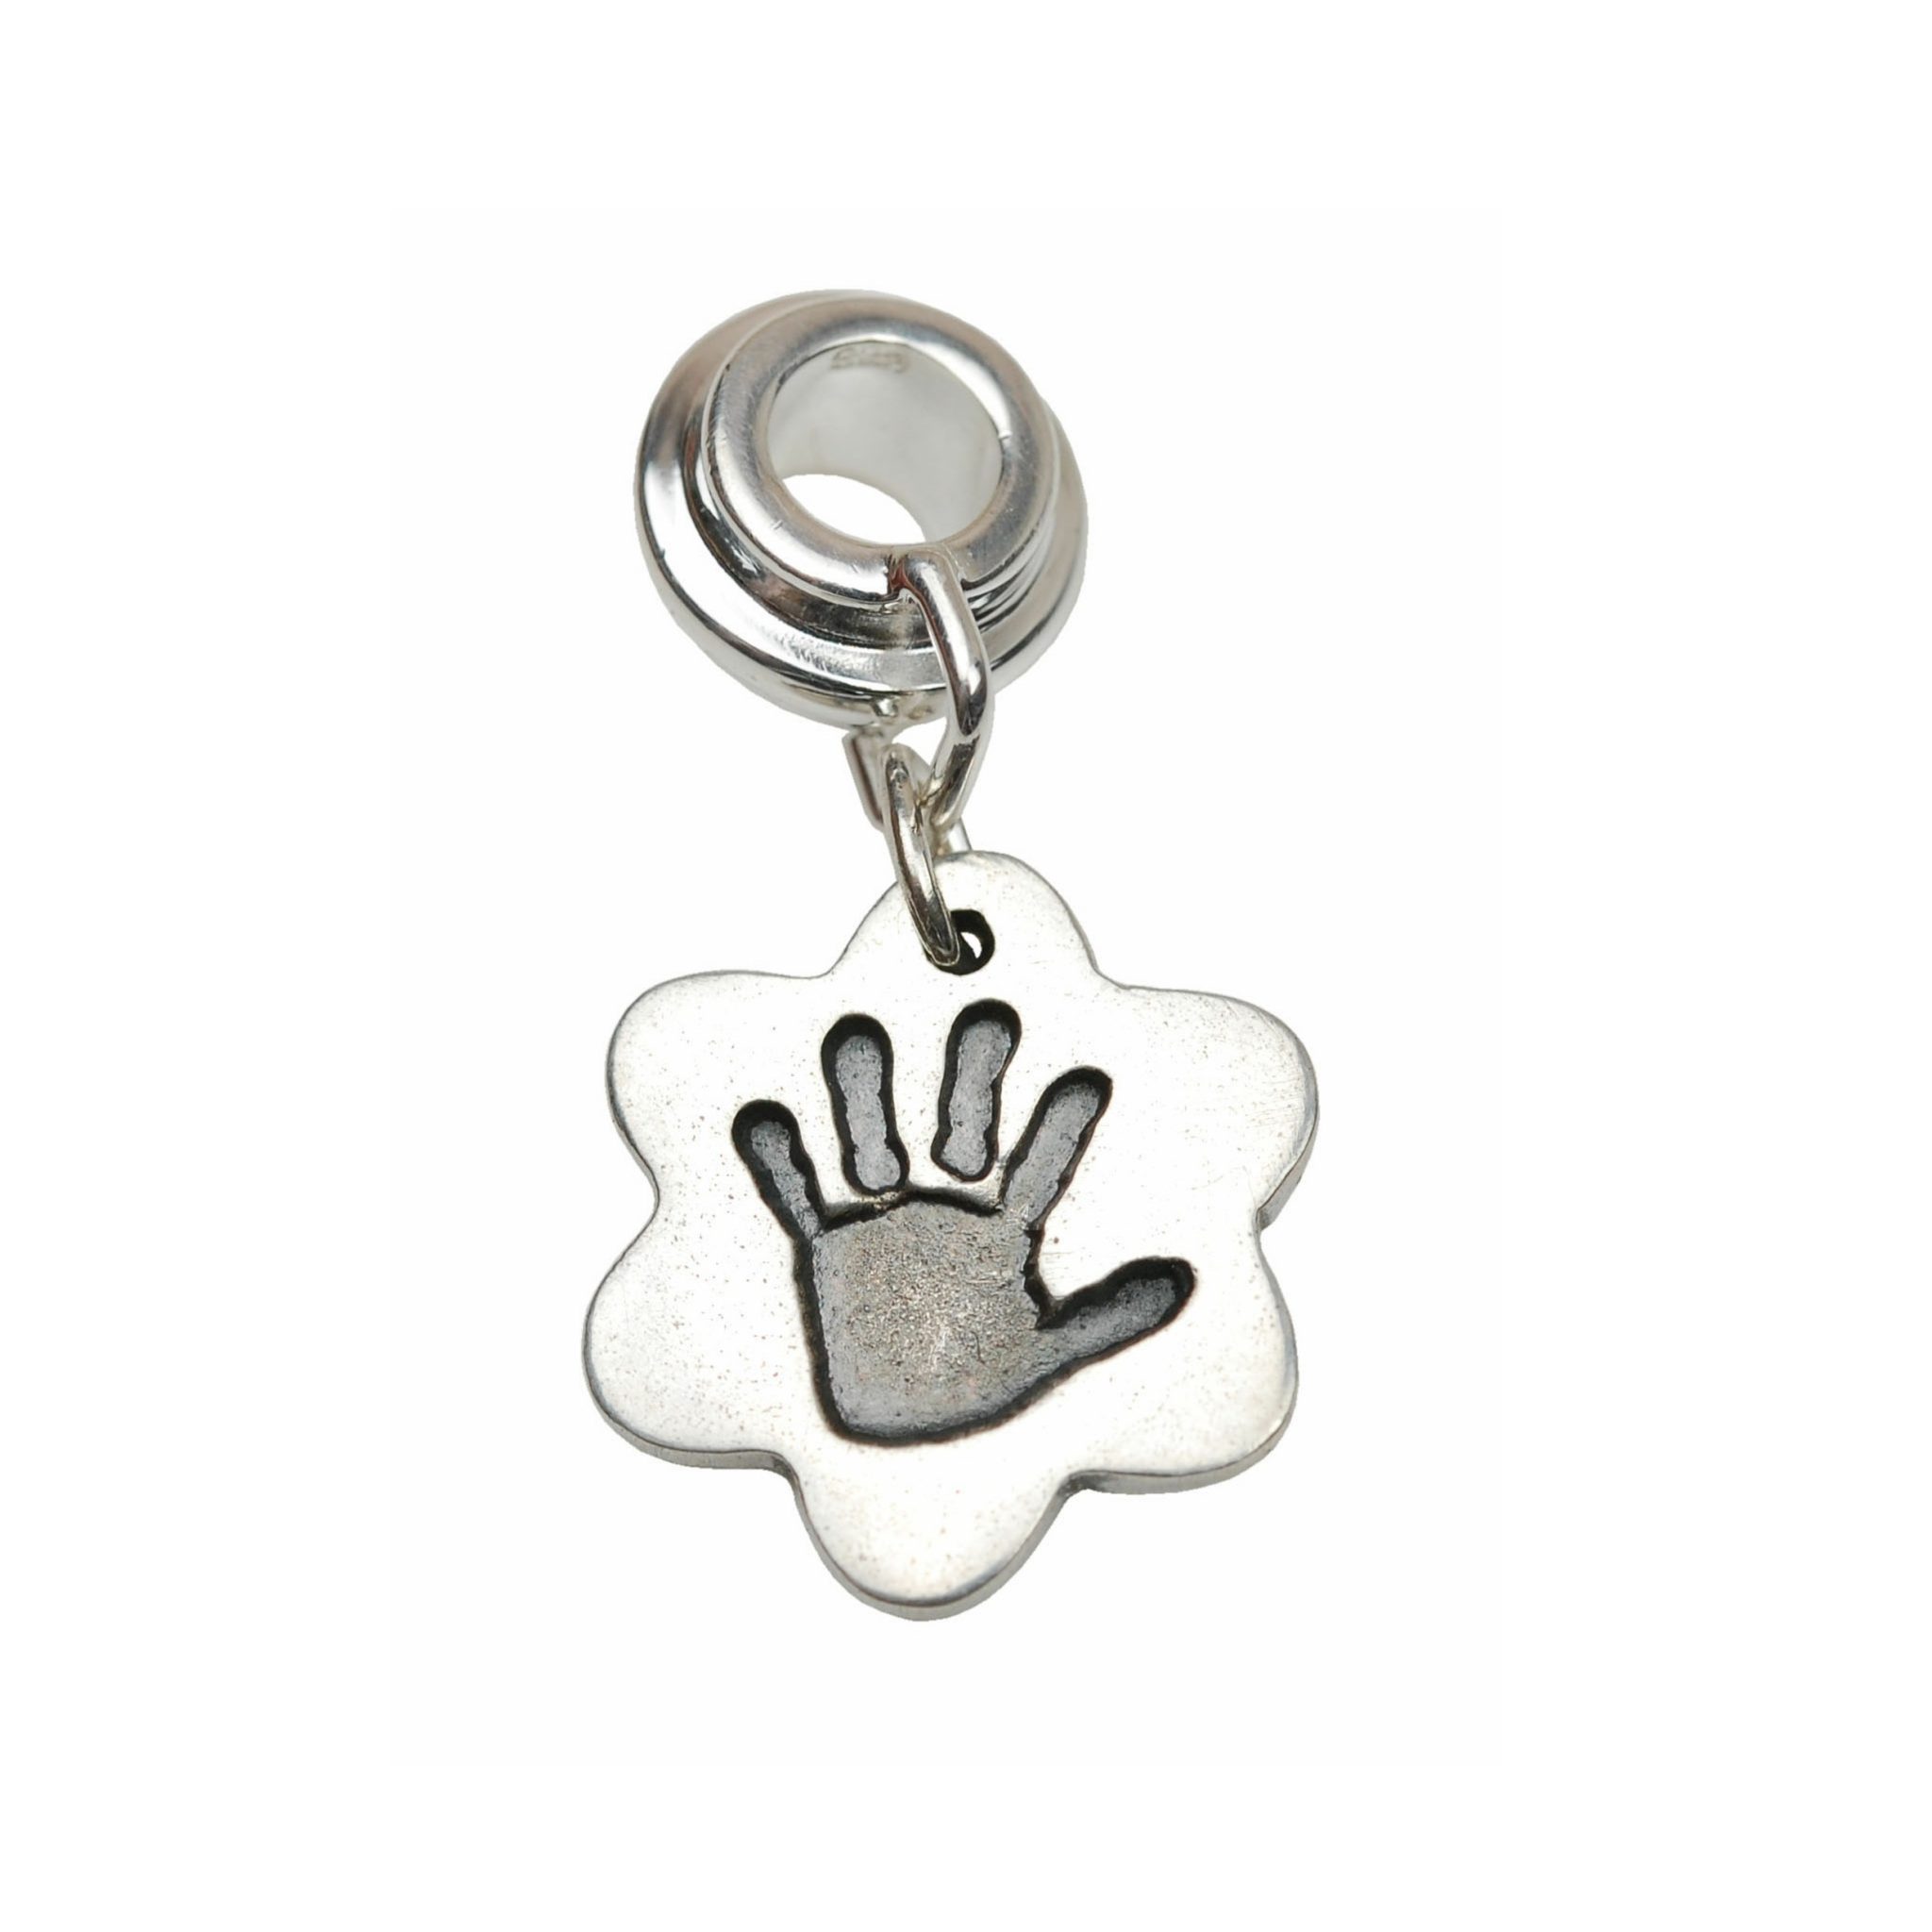 Silver flower hand print charm with charm carrier